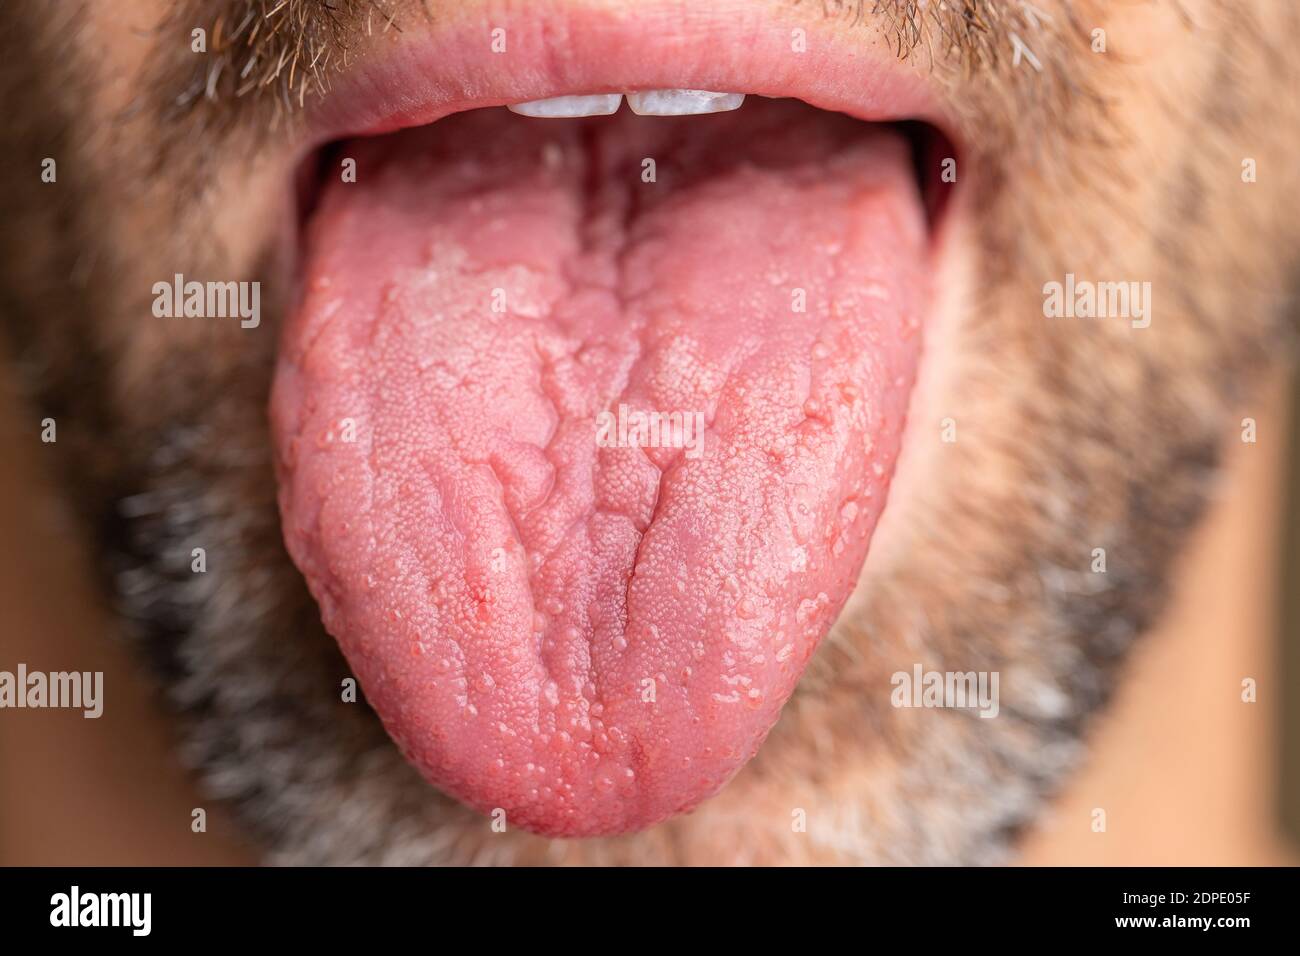 A white male with brown and white facial hair. Tongue is sticking out to show geographic tongue, also known as benign migratory glossitis. Stock Photo